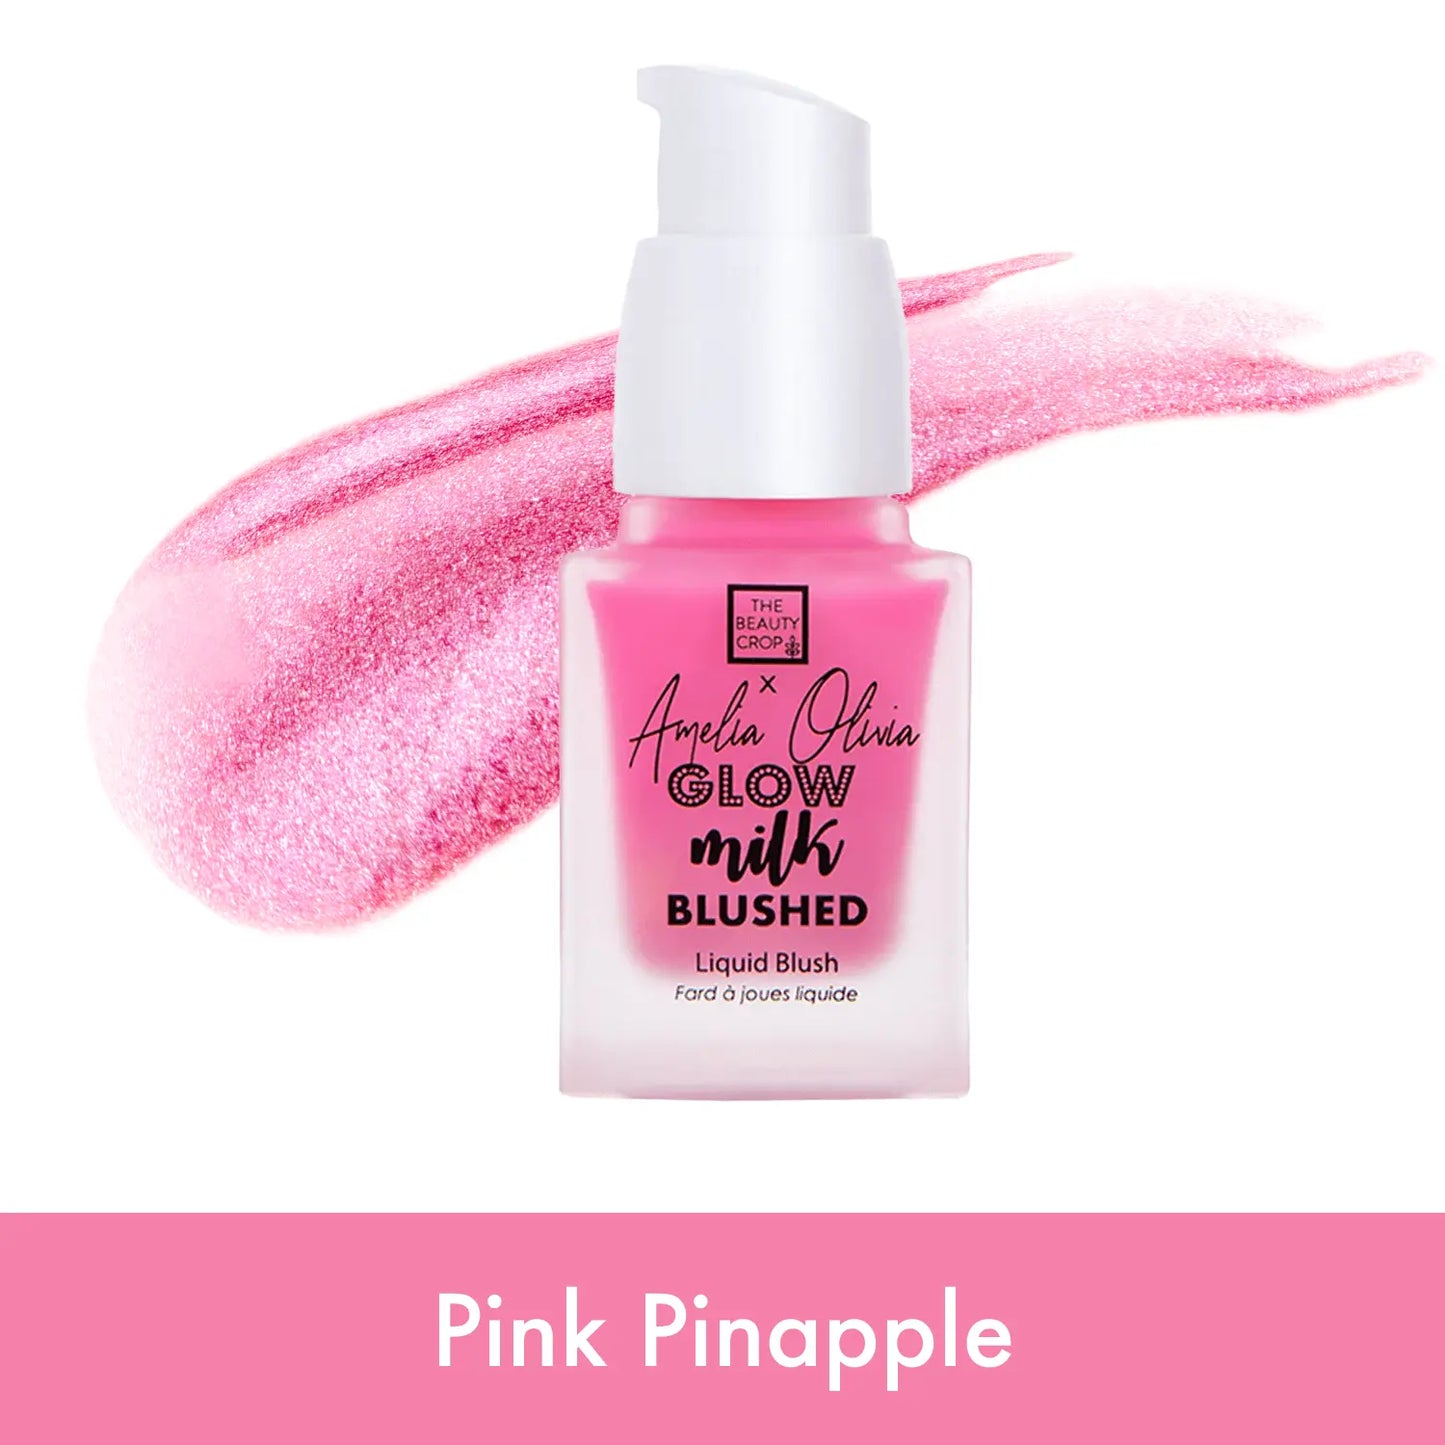 A bright pink shade that blends out into a rosy pink hue with a soft shimmer. Perfect for all skin tones, including fair.